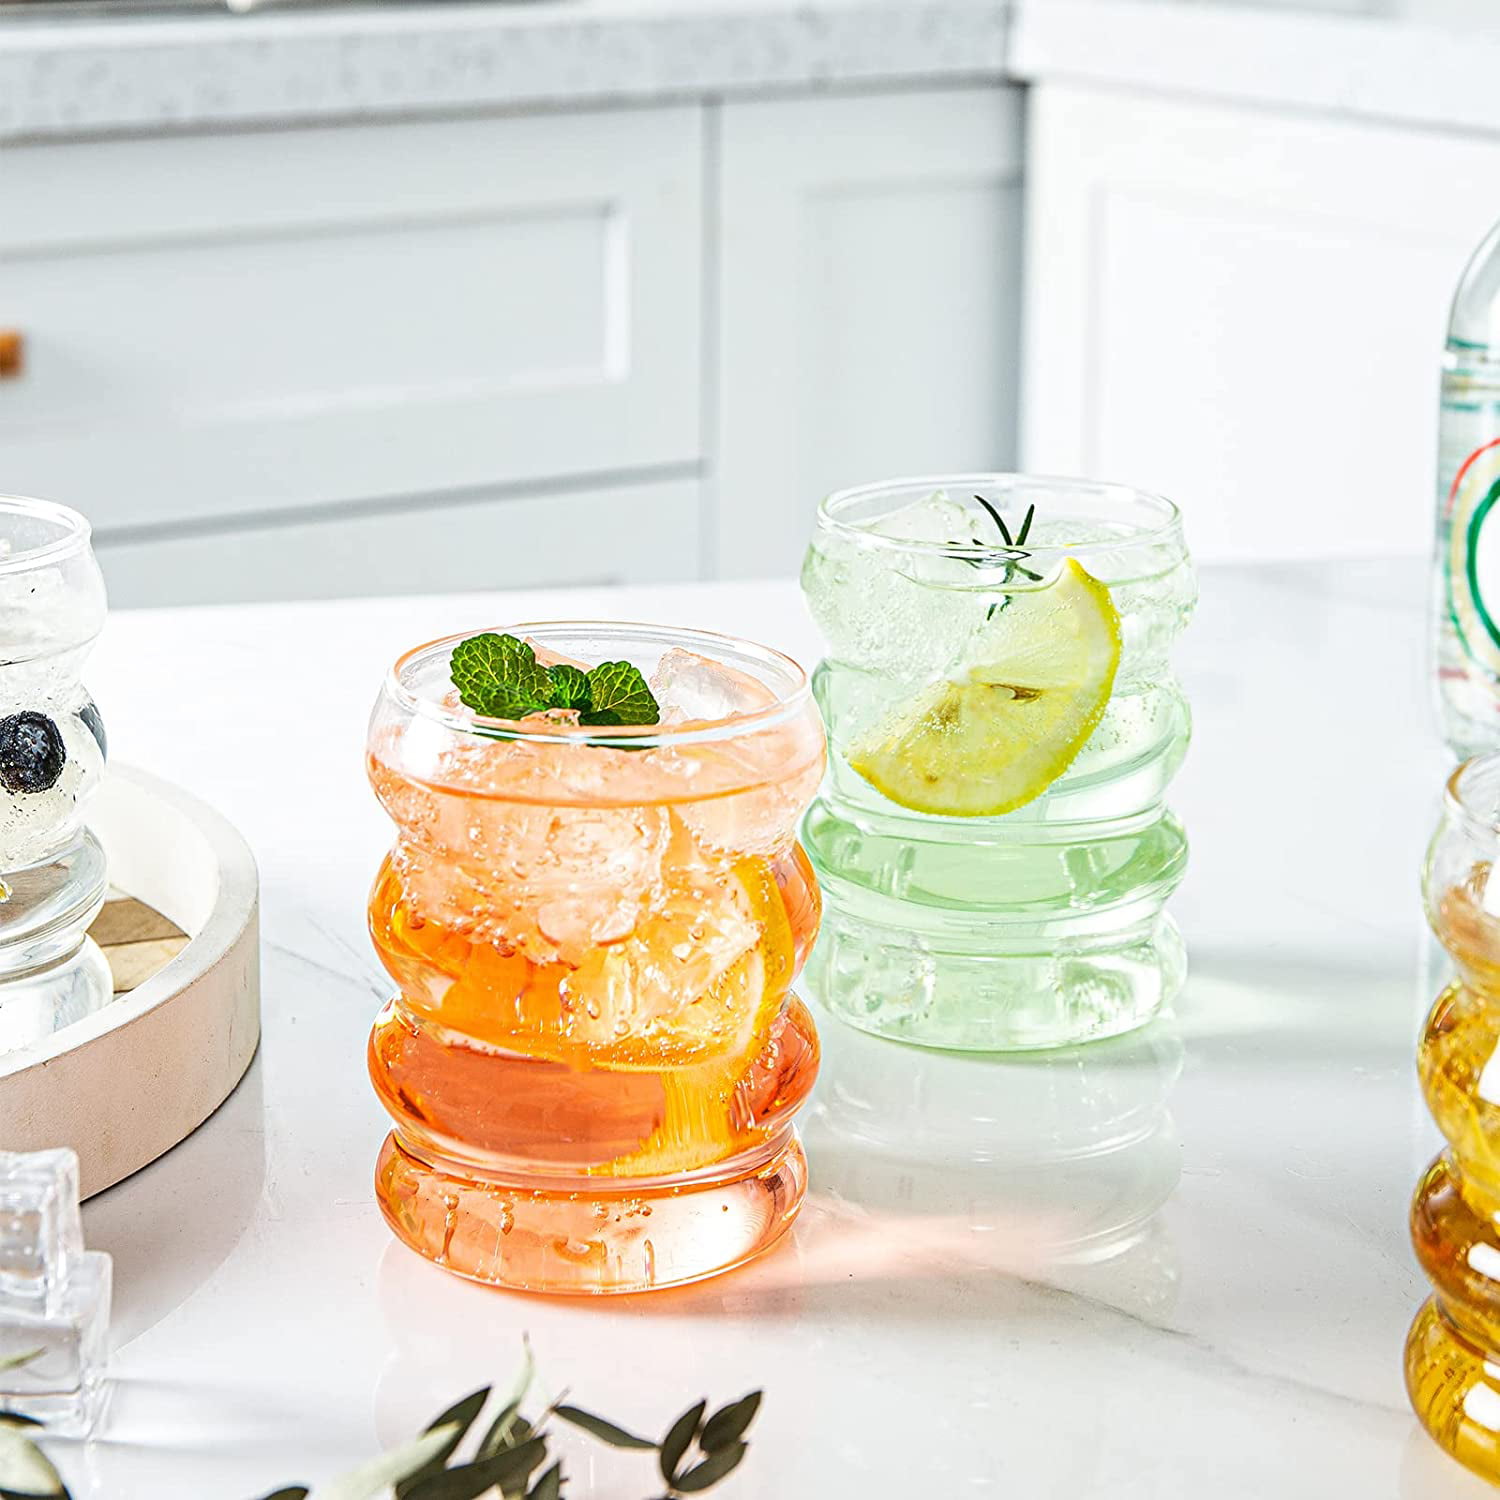 37 Unique Drinking Glasses to Upgrade Your Home Bar - Groovy Guy Gifts